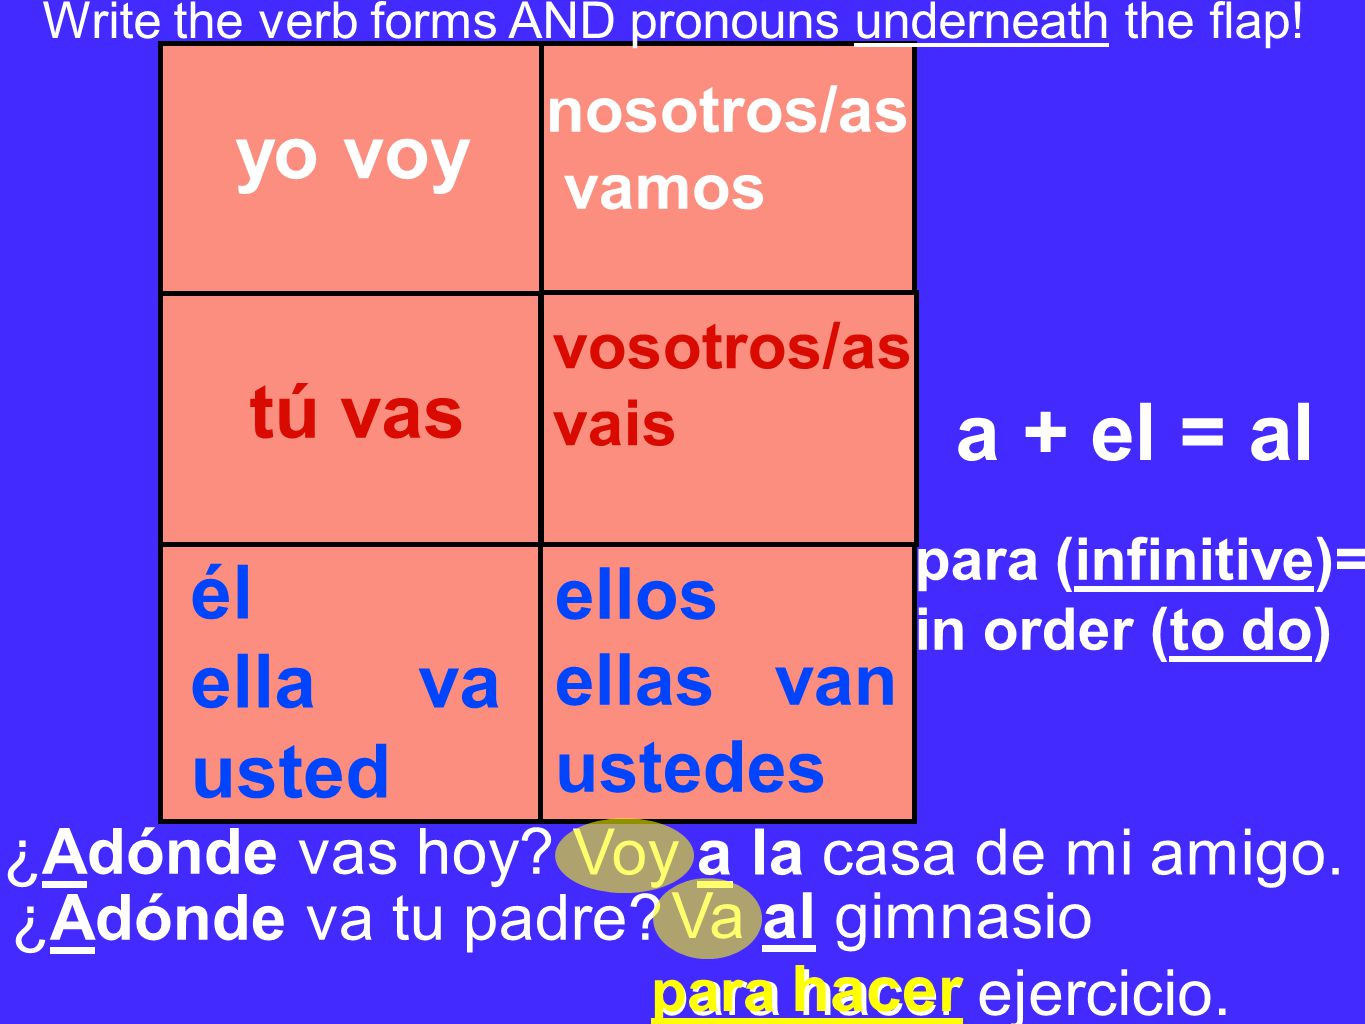 Write the verb forms AND pronouns underneath the flap!